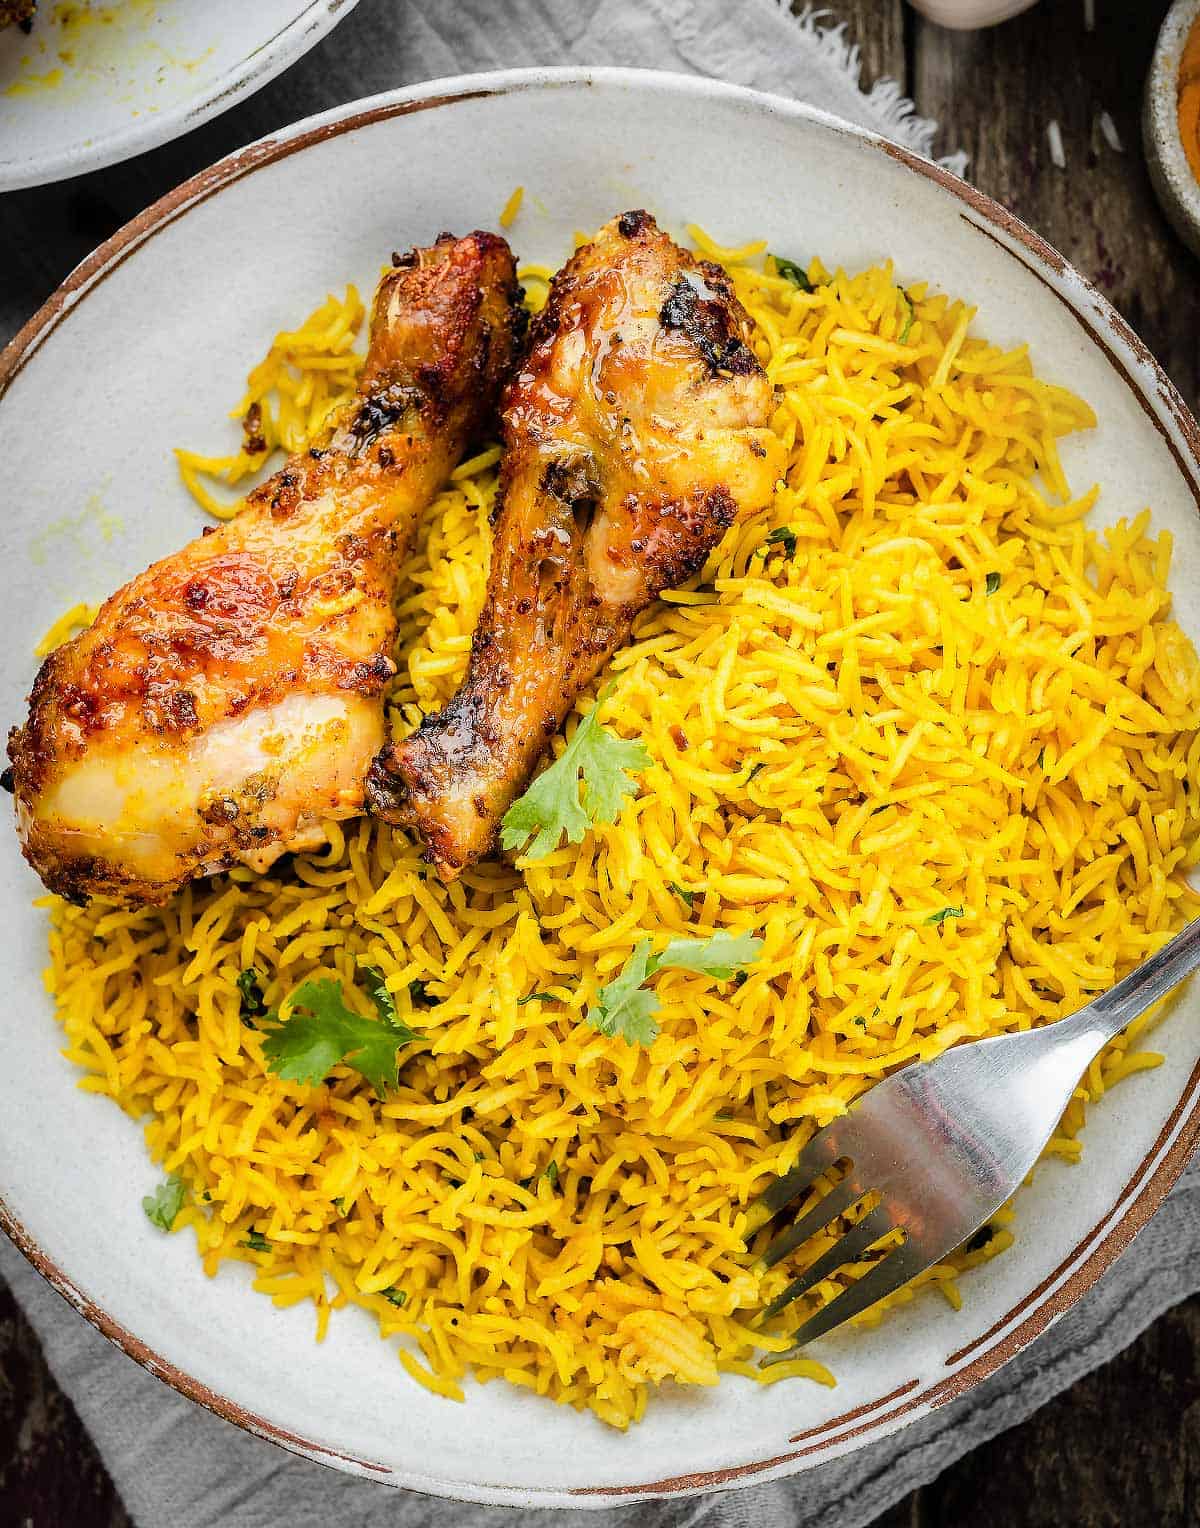 Garlic Turmeric rice served in a bowl with chicken drumsticks